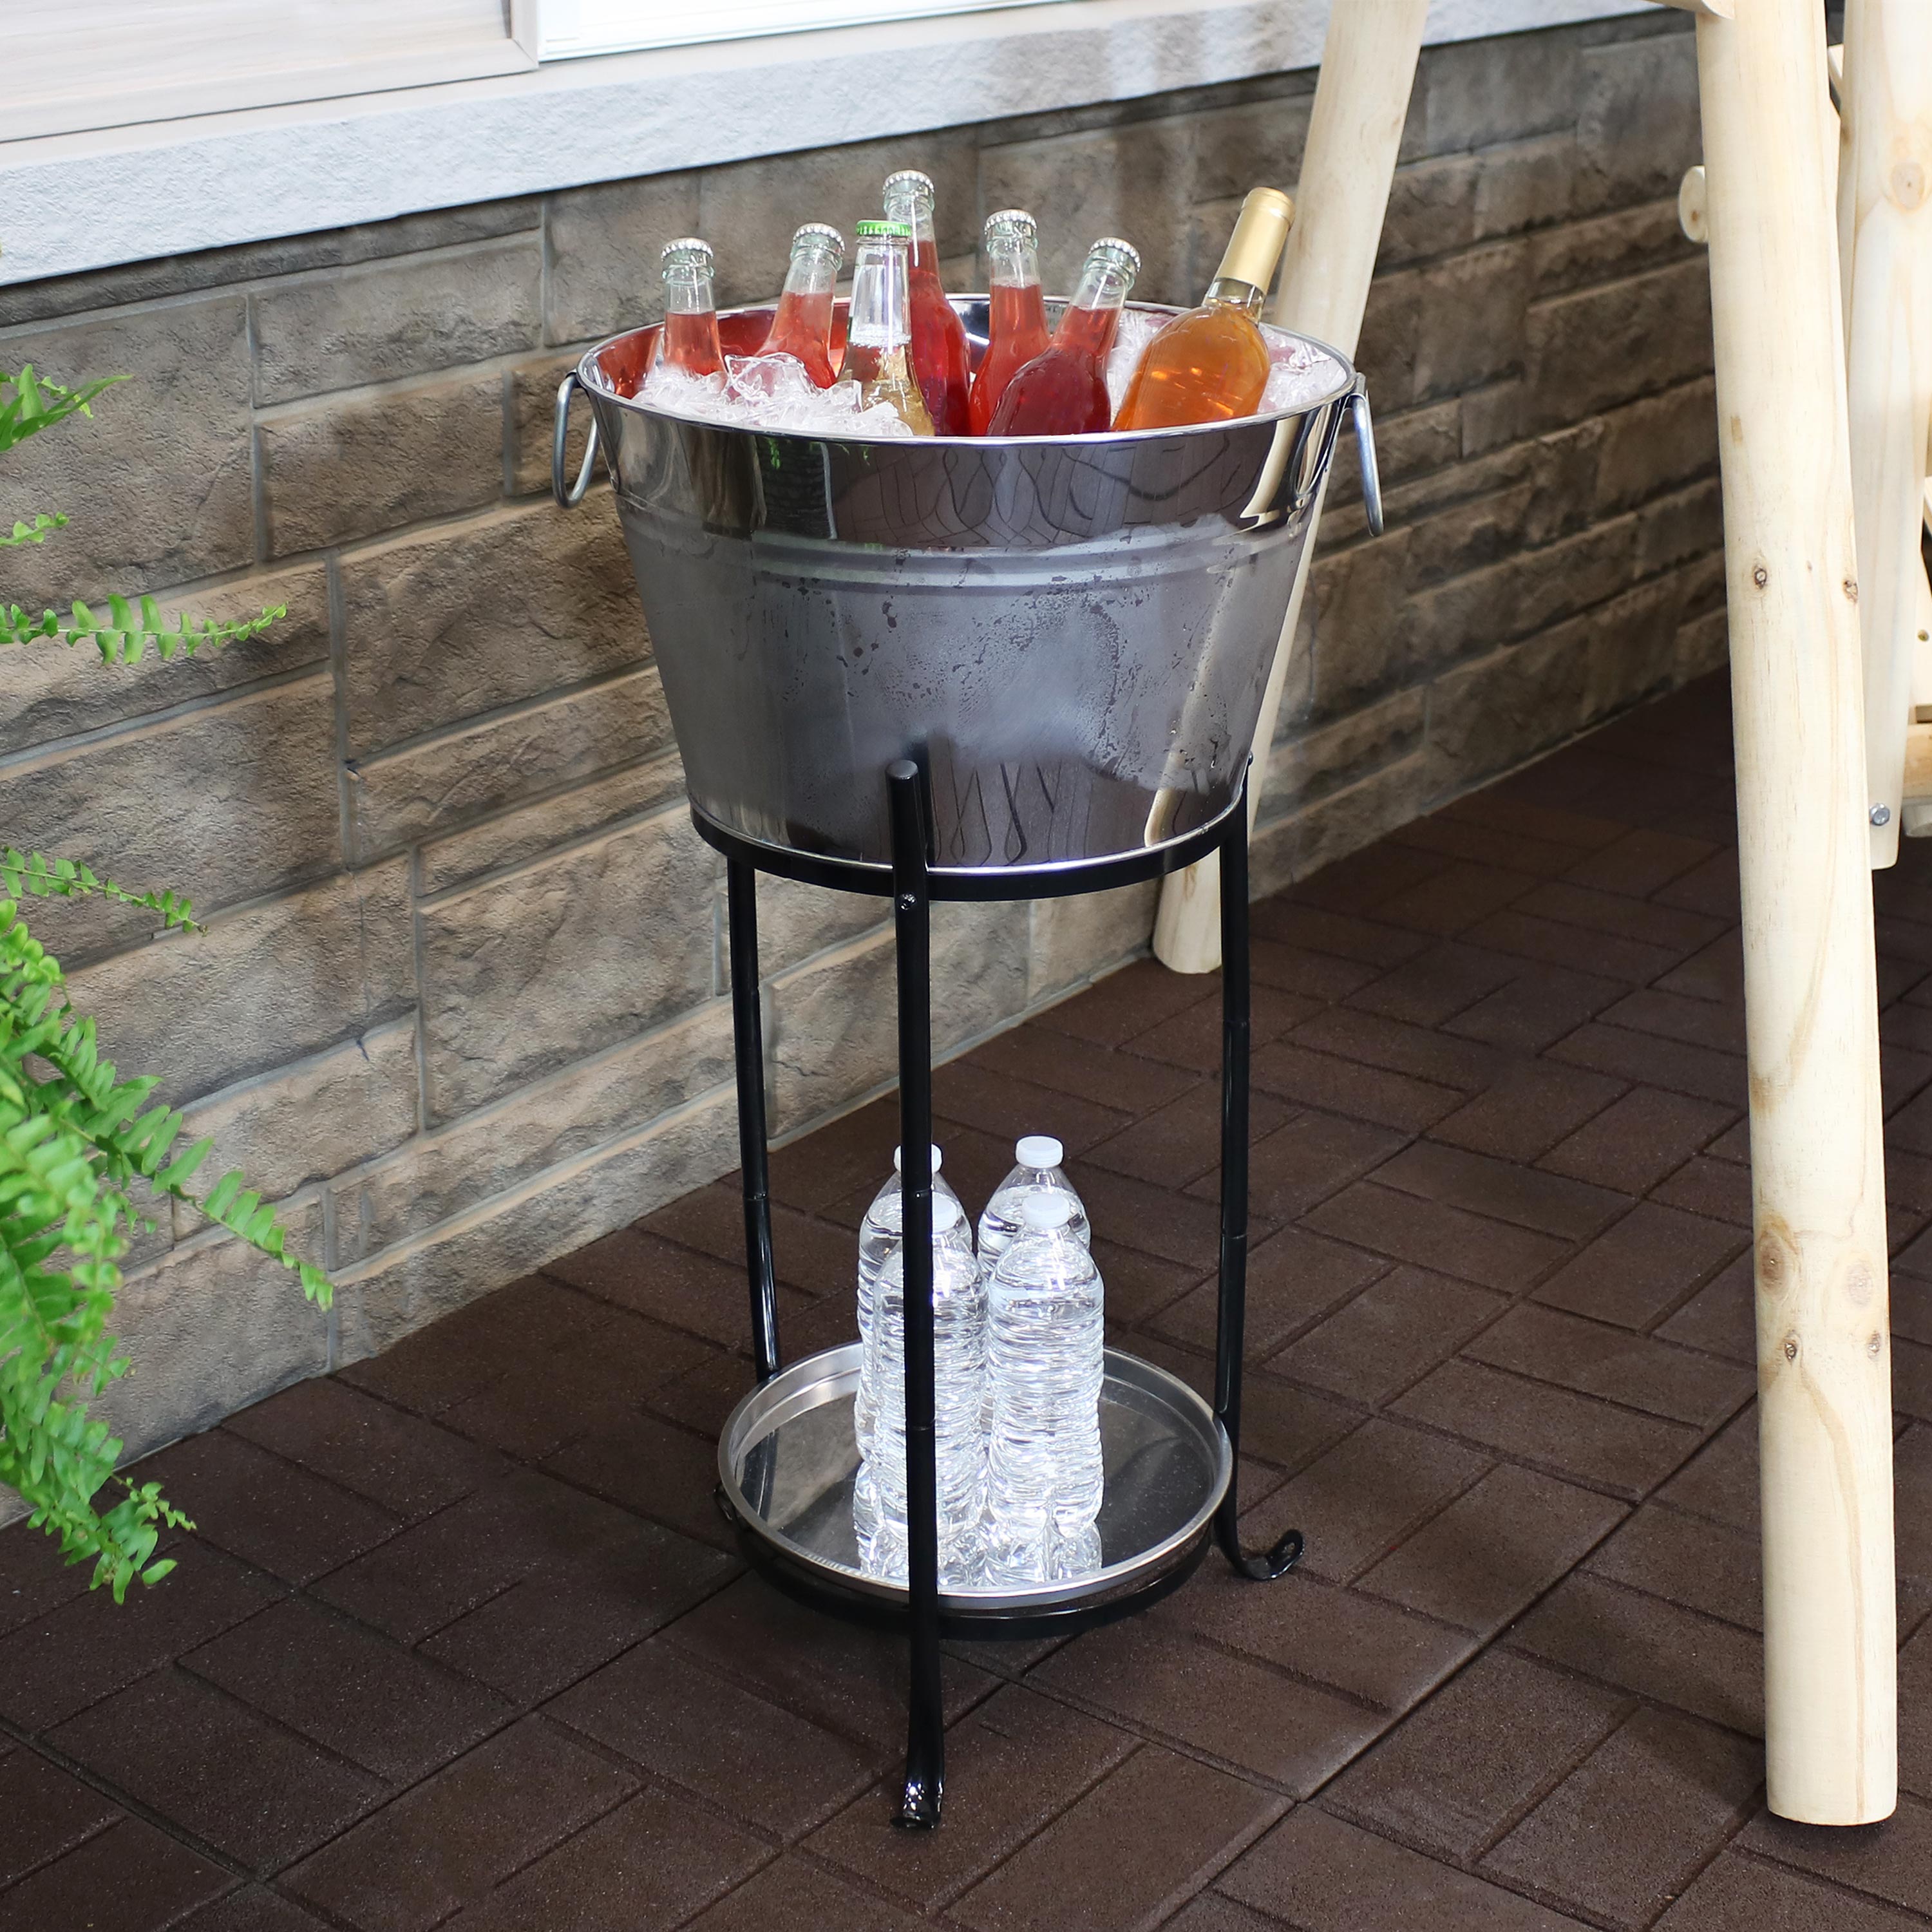 Sunnydaze Stainless Steel Ice Bucket Drink Cooler with Stand - image 2 of 11